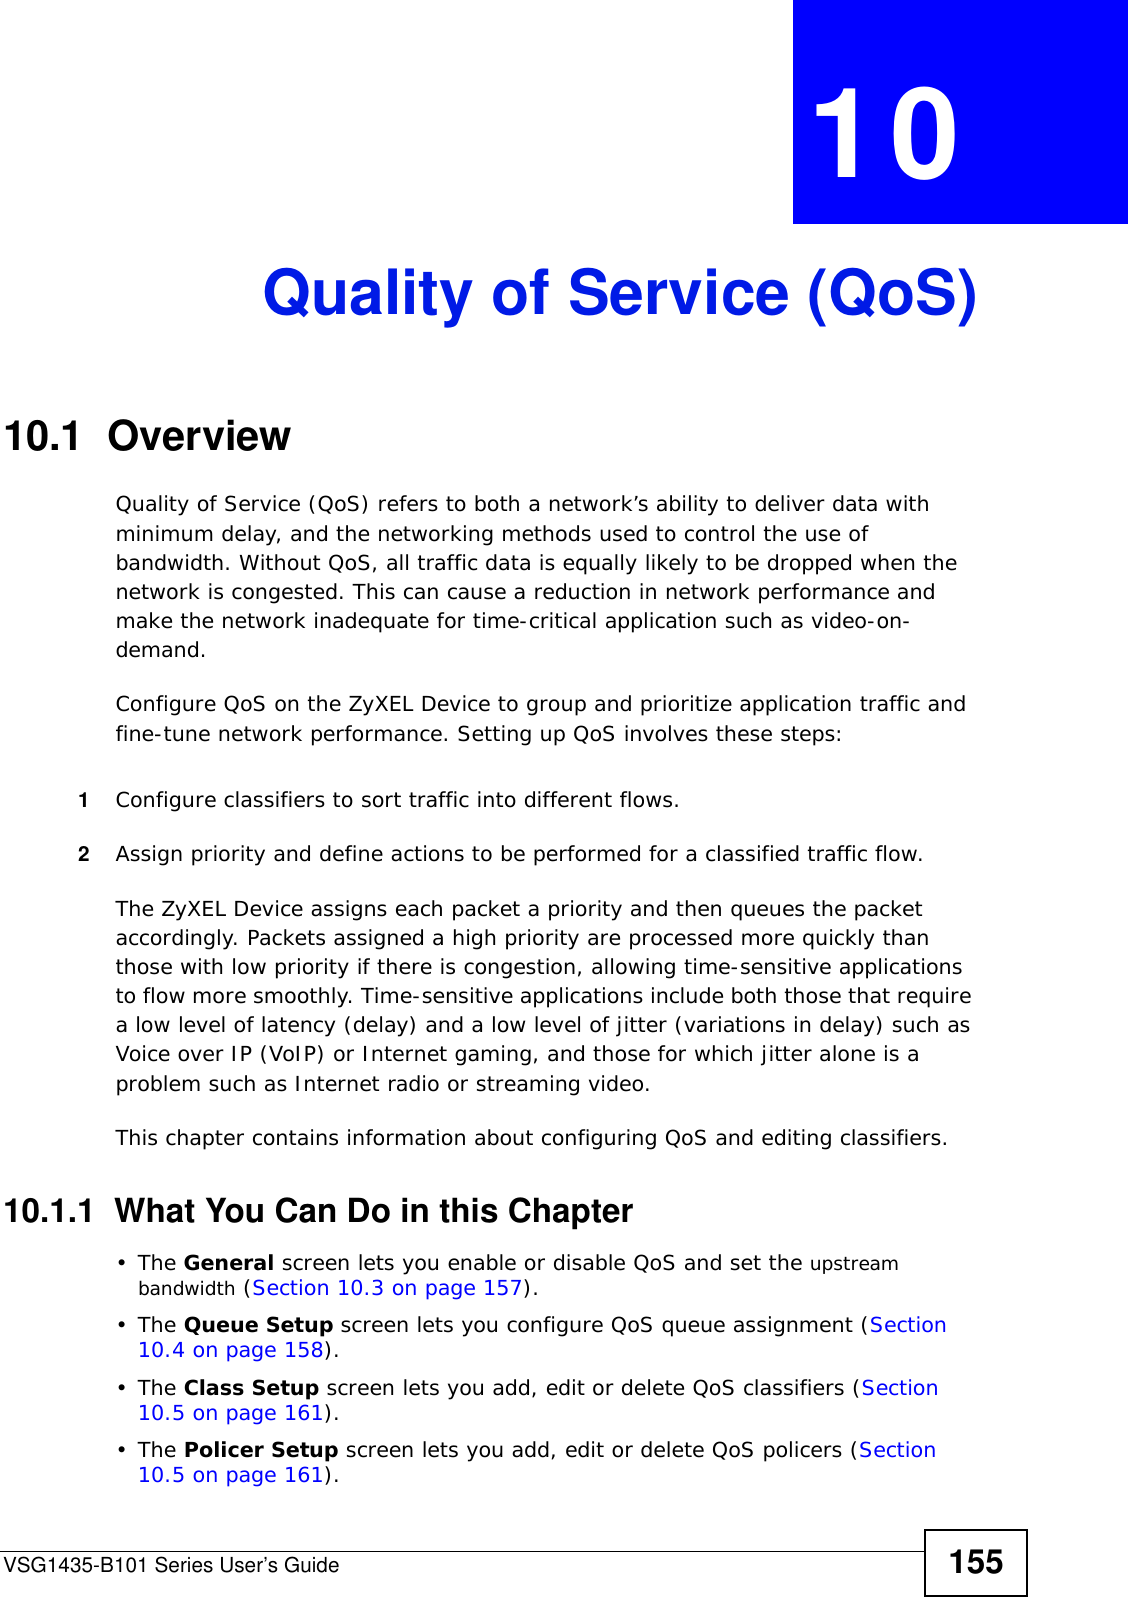 VSG1435-B101 Series User’s Guide 155CHAPTER  10 Quality of Service (QoS)10.1  Overview Quality of Service (QoS) refers to both a network’s ability to deliver data with minimum delay, and the networking methods used to control the use of bandwidth. Without QoS, all traffic data is equally likely to be dropped when the network is congested. This can cause a reduction in network performance and make the network inadequate for time-critical application such as video-on-demand.Configure QoS on the ZyXEL Device to group and prioritize application traffic and fine-tune network performance. Setting up QoS involves these steps:1Configure classifiers to sort traffic into different flows. 2Assign priority and define actions to be performed for a classified traffic flow. The ZyXEL Device assigns each packet a priority and then queues the packet accordingly. Packets assigned a high priority are processed more quickly than those with low priority if there is congestion, allowing time-sensitive applications to flow more smoothly. Time-sensitive applications include both those that require a low level of latency (delay) and a low level of jitter (variations in delay) such as Voice over IP (VoIP) or Internet gaming, and those for which jitter alone is a problem such as Internet radio or streaming video.This chapter contains information about configuring QoS and editing classifiers.10.1.1  What You Can Do in this Chapter•The General screen lets you enable or disable QoS and set the upstream bandwidth (Section 10.3 on page 157).•The Queue Setup screen lets you configure QoS queue assignment (Section 10.4 on page 158).•The Class Setup screen lets you add, edit or delete QoS classifiers (Section 10.5 on page 161).•The Policer Setup screen lets you add, edit or delete QoS policers (Section 10.5 on page 161).